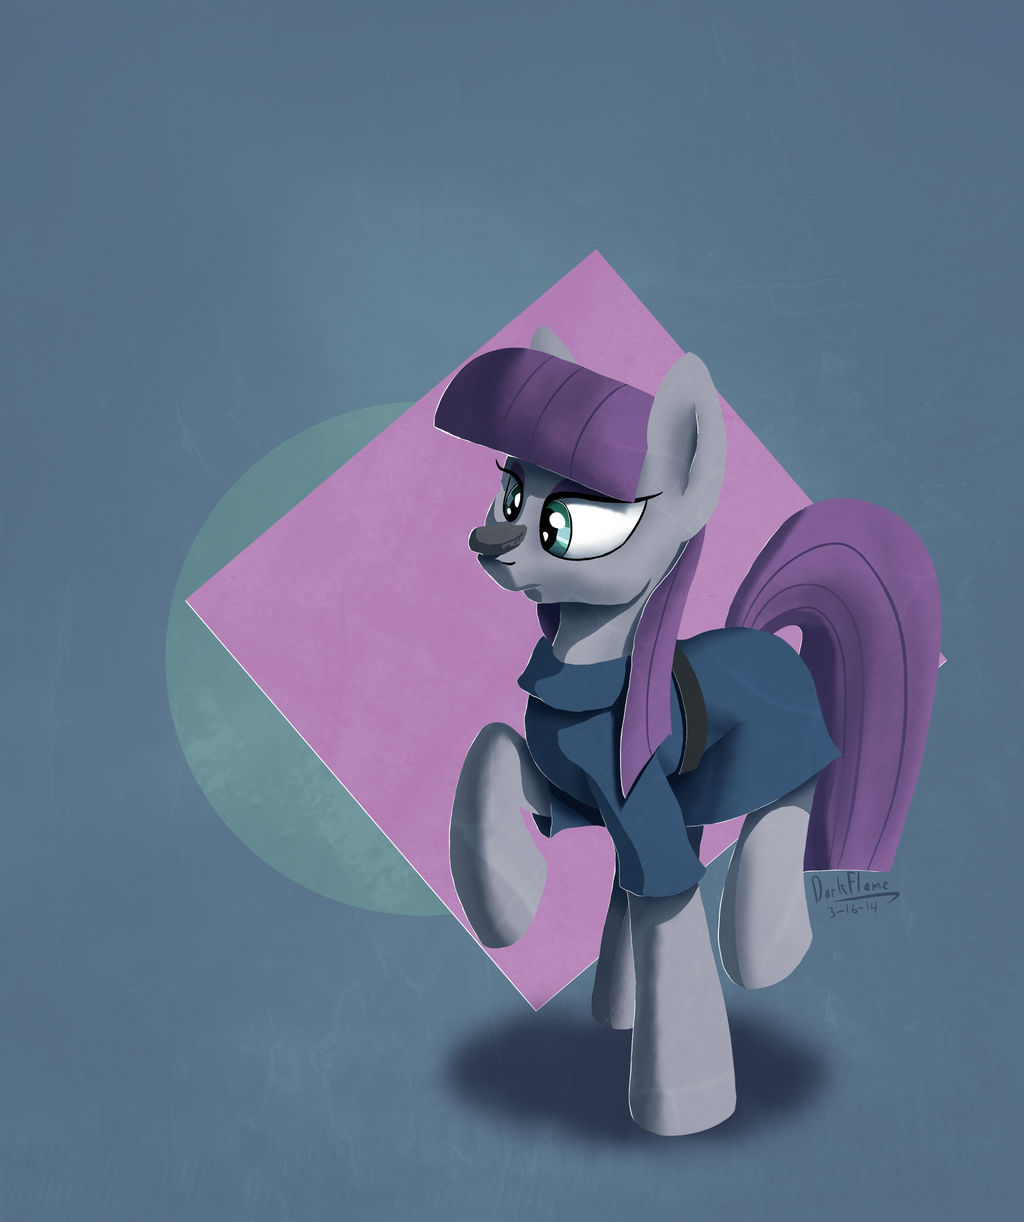 http://img01.deviantart.net/6687/i/2014/075/f/f/maud_pie_and_her_second_best_friend_by_darkflame75-d7ae7l5.png